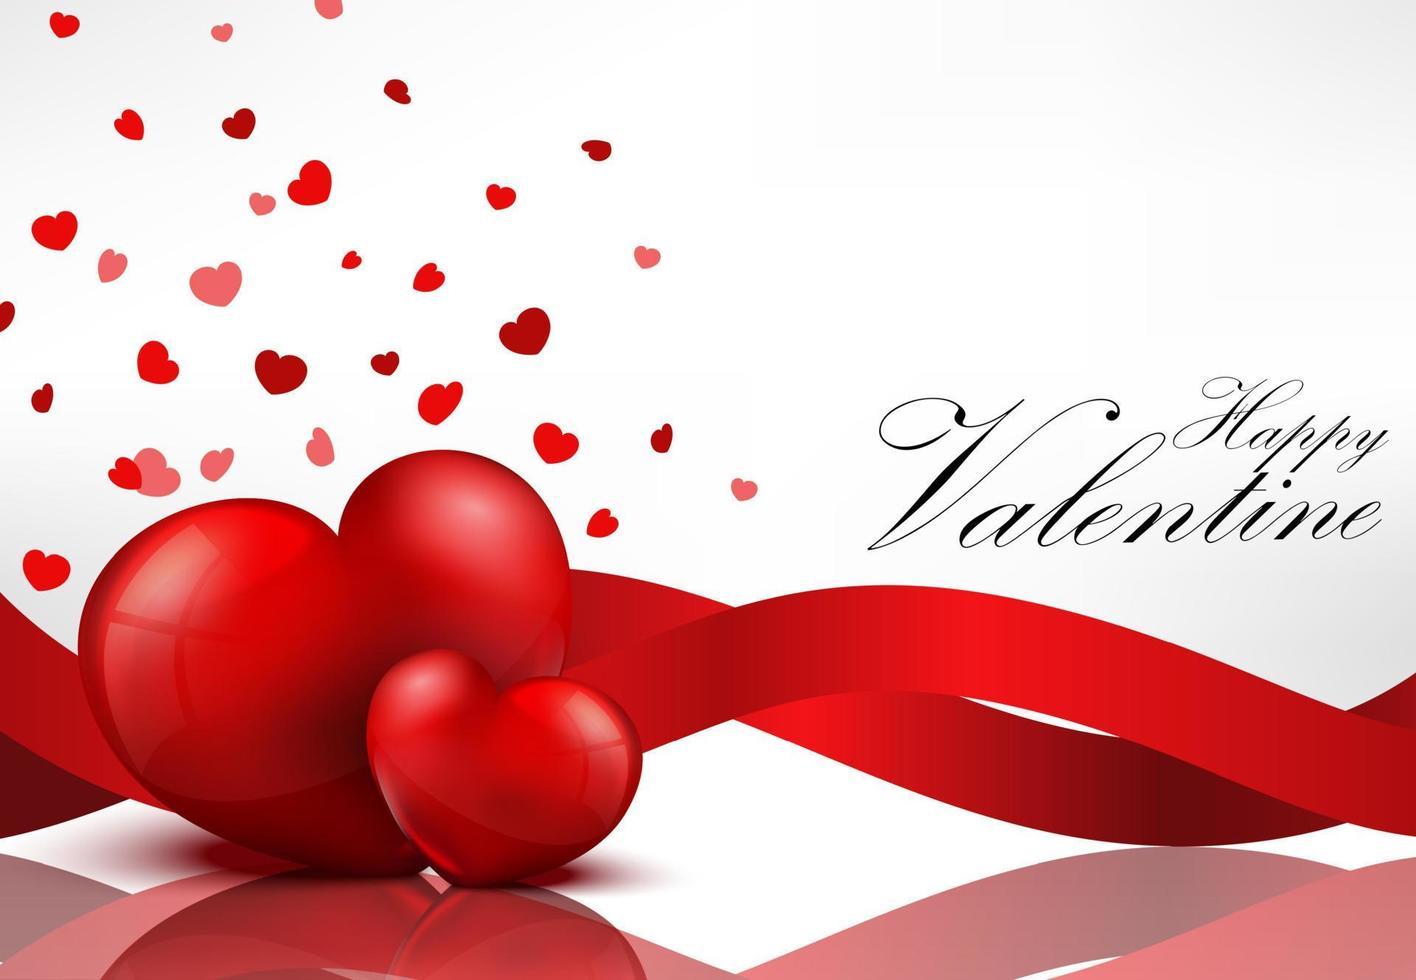 Red heart background with red ribbons vector